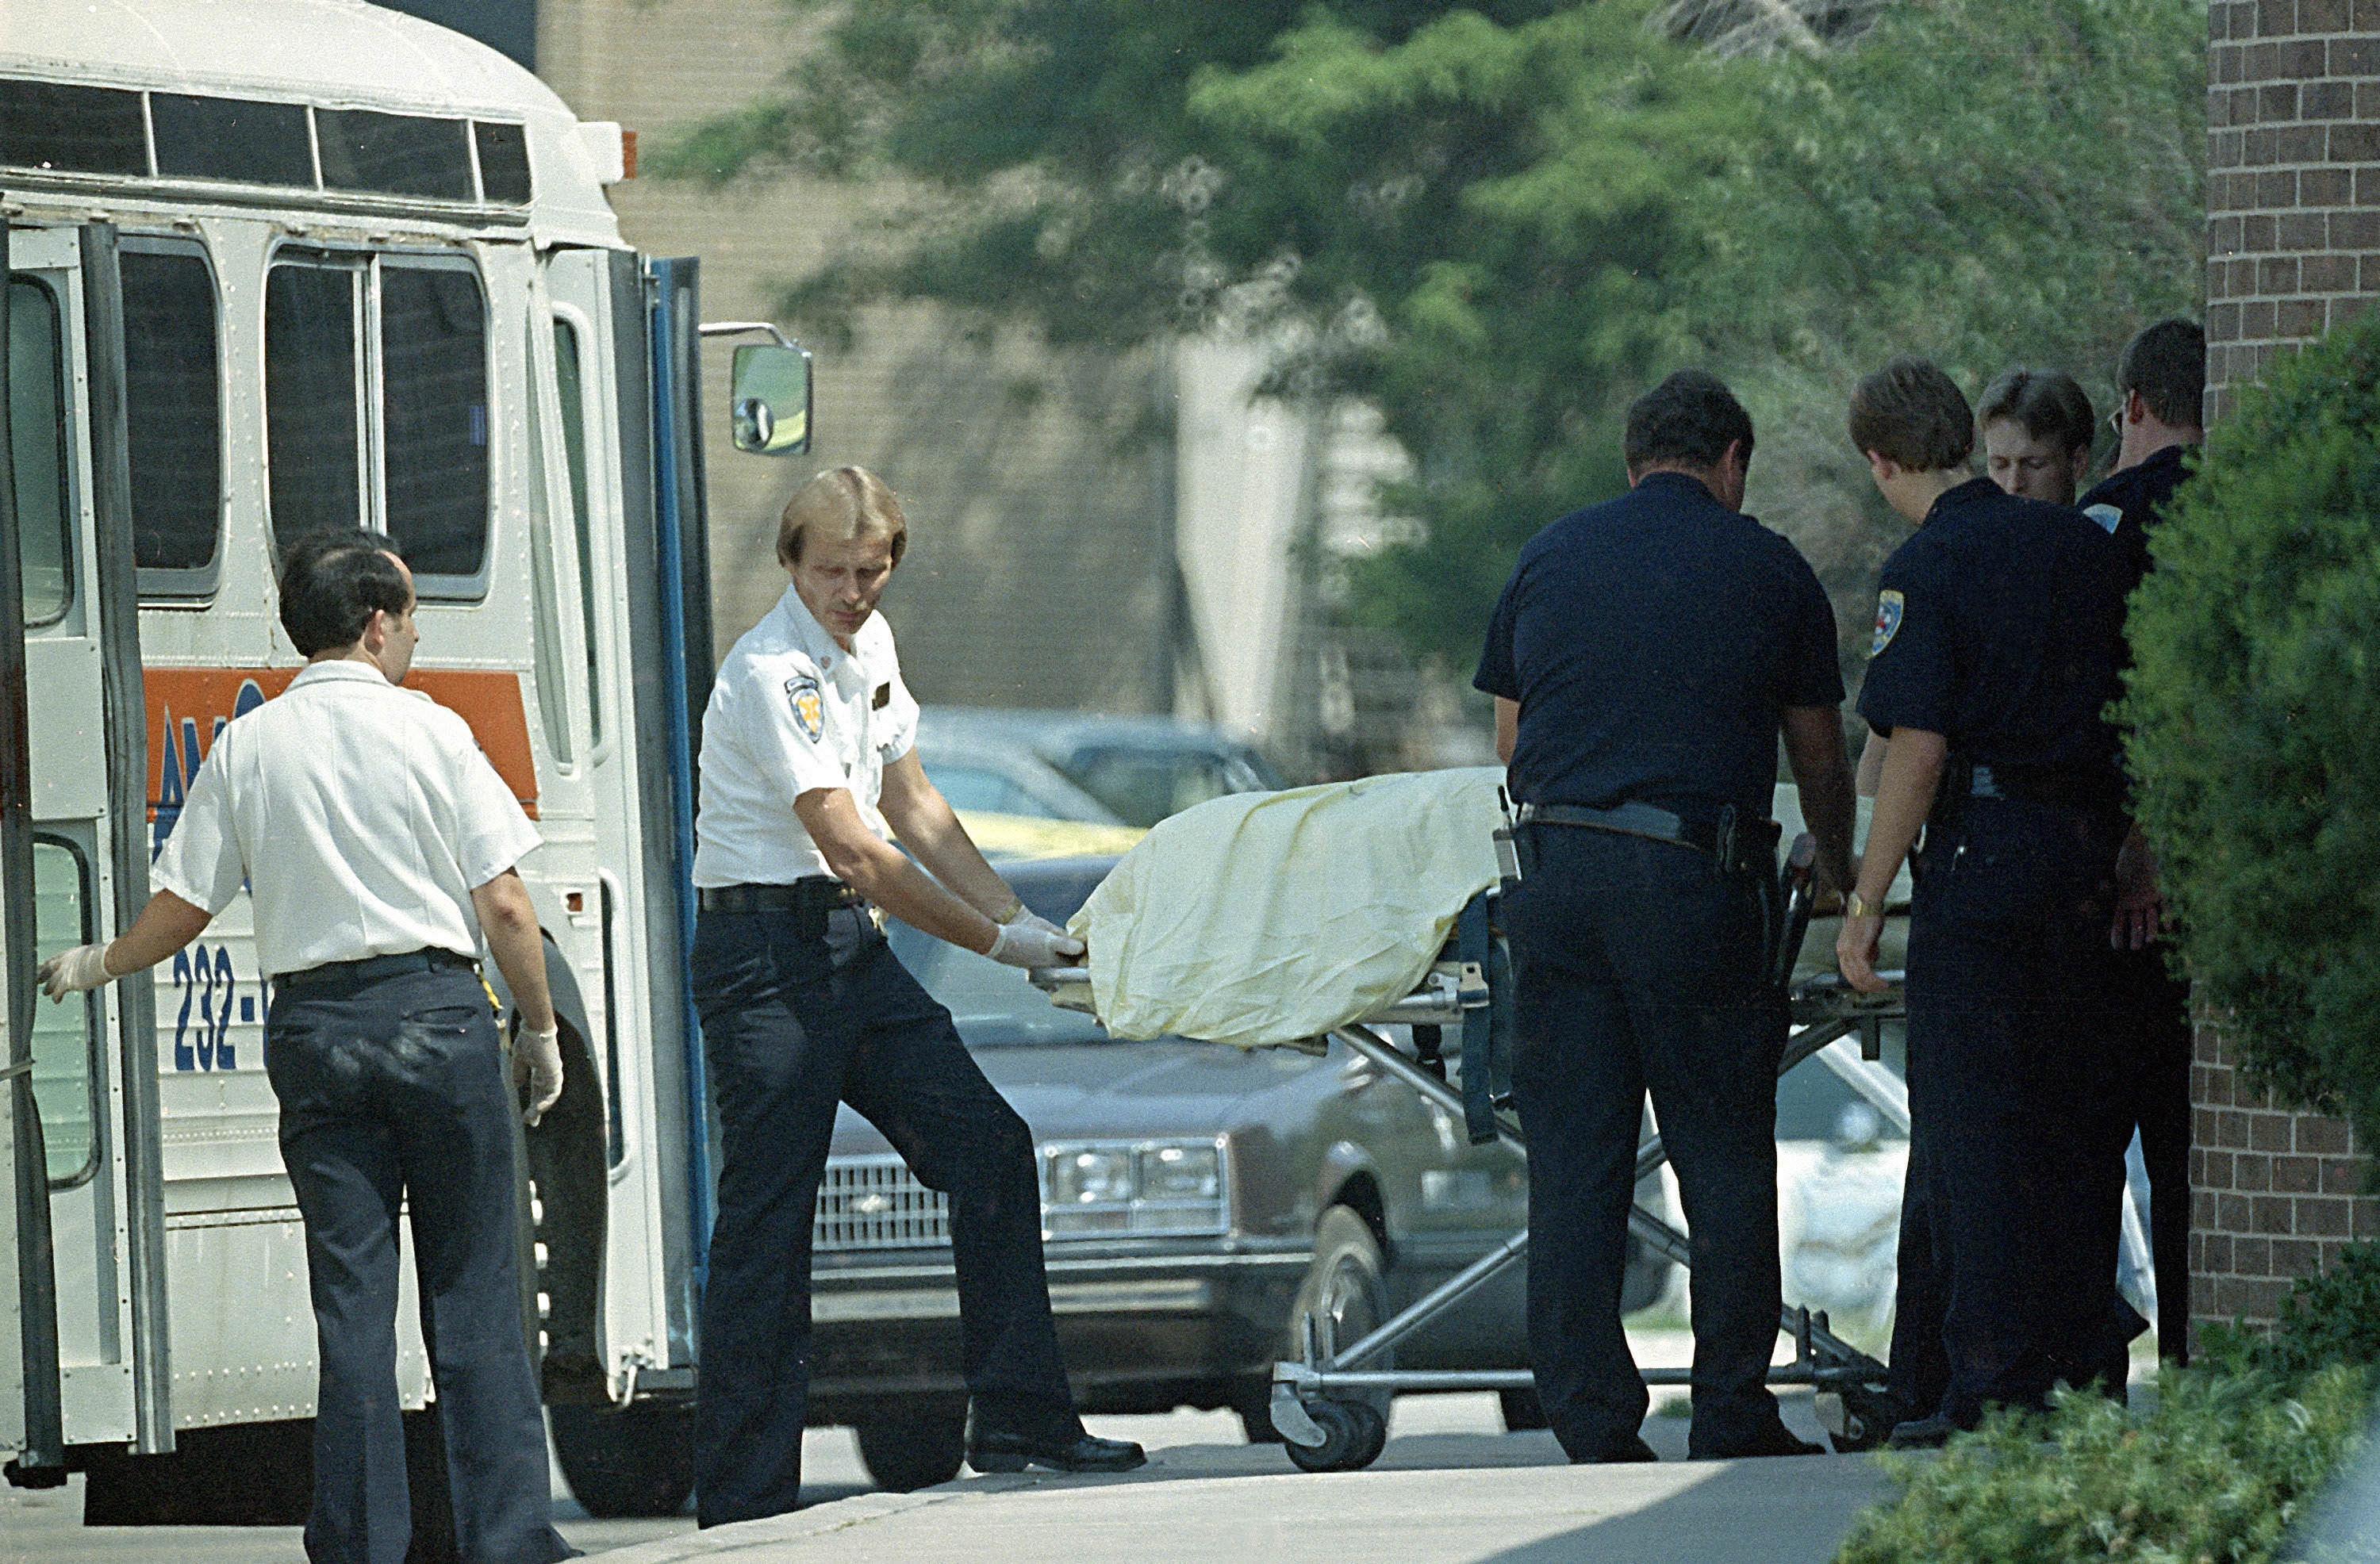 Police and emergency personnel wheel out a body after the Edmond Post Office Shooting in Edmond, Oklahoma, US in 1986. A postal worker named Patrick Sherrill entered the building and in 15 minutes hunted and shot 20 former coworkers. He killed 14 of them before he committed suicide as police began to surround the building. Motives for his actions are debated, but many presume he was to be fired after a mistake the previous day and committed the shootings when the anxiety took him over. At the time it was 3rd worst mass shooting in the US. The event shocked the nation, and any term today referring to "going postal" is a direct reference to this shooting.